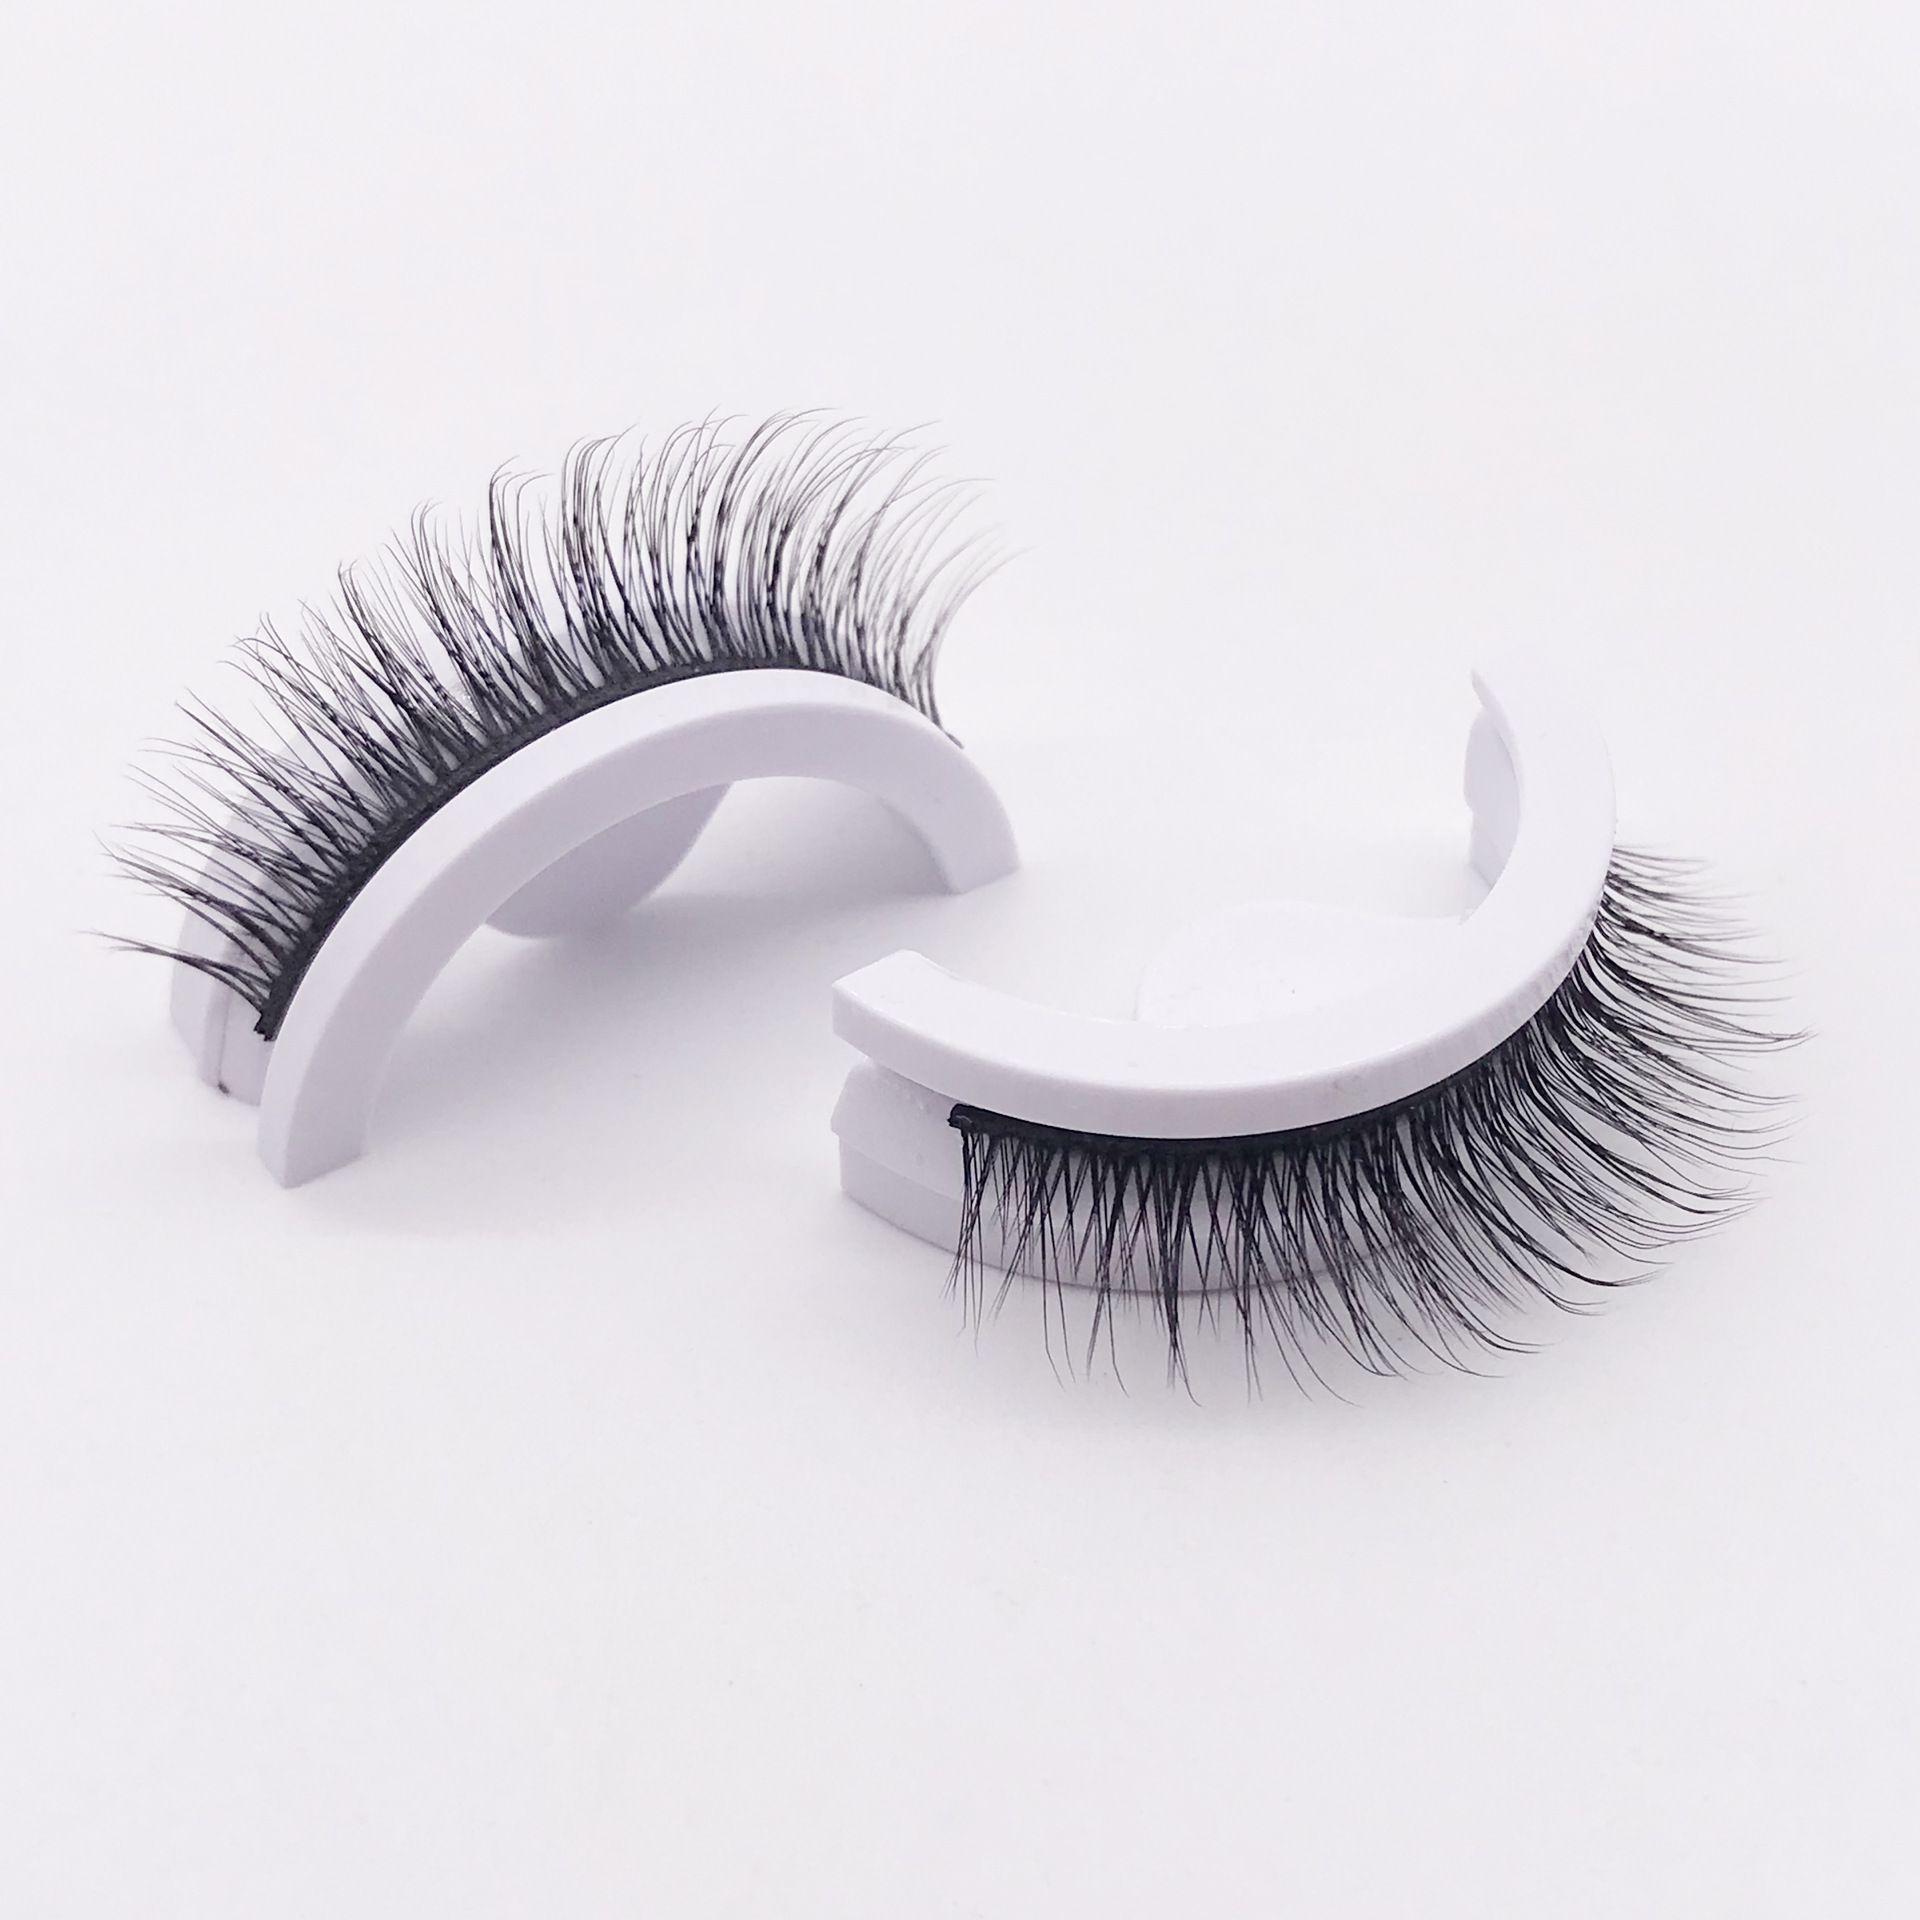 Hot Sale One-Pair Package Soft Self-Adhesive False Eyelashes Easy to Wear Double Adhesive Strip Self-Adhesive Eyelash Factory Wholesale